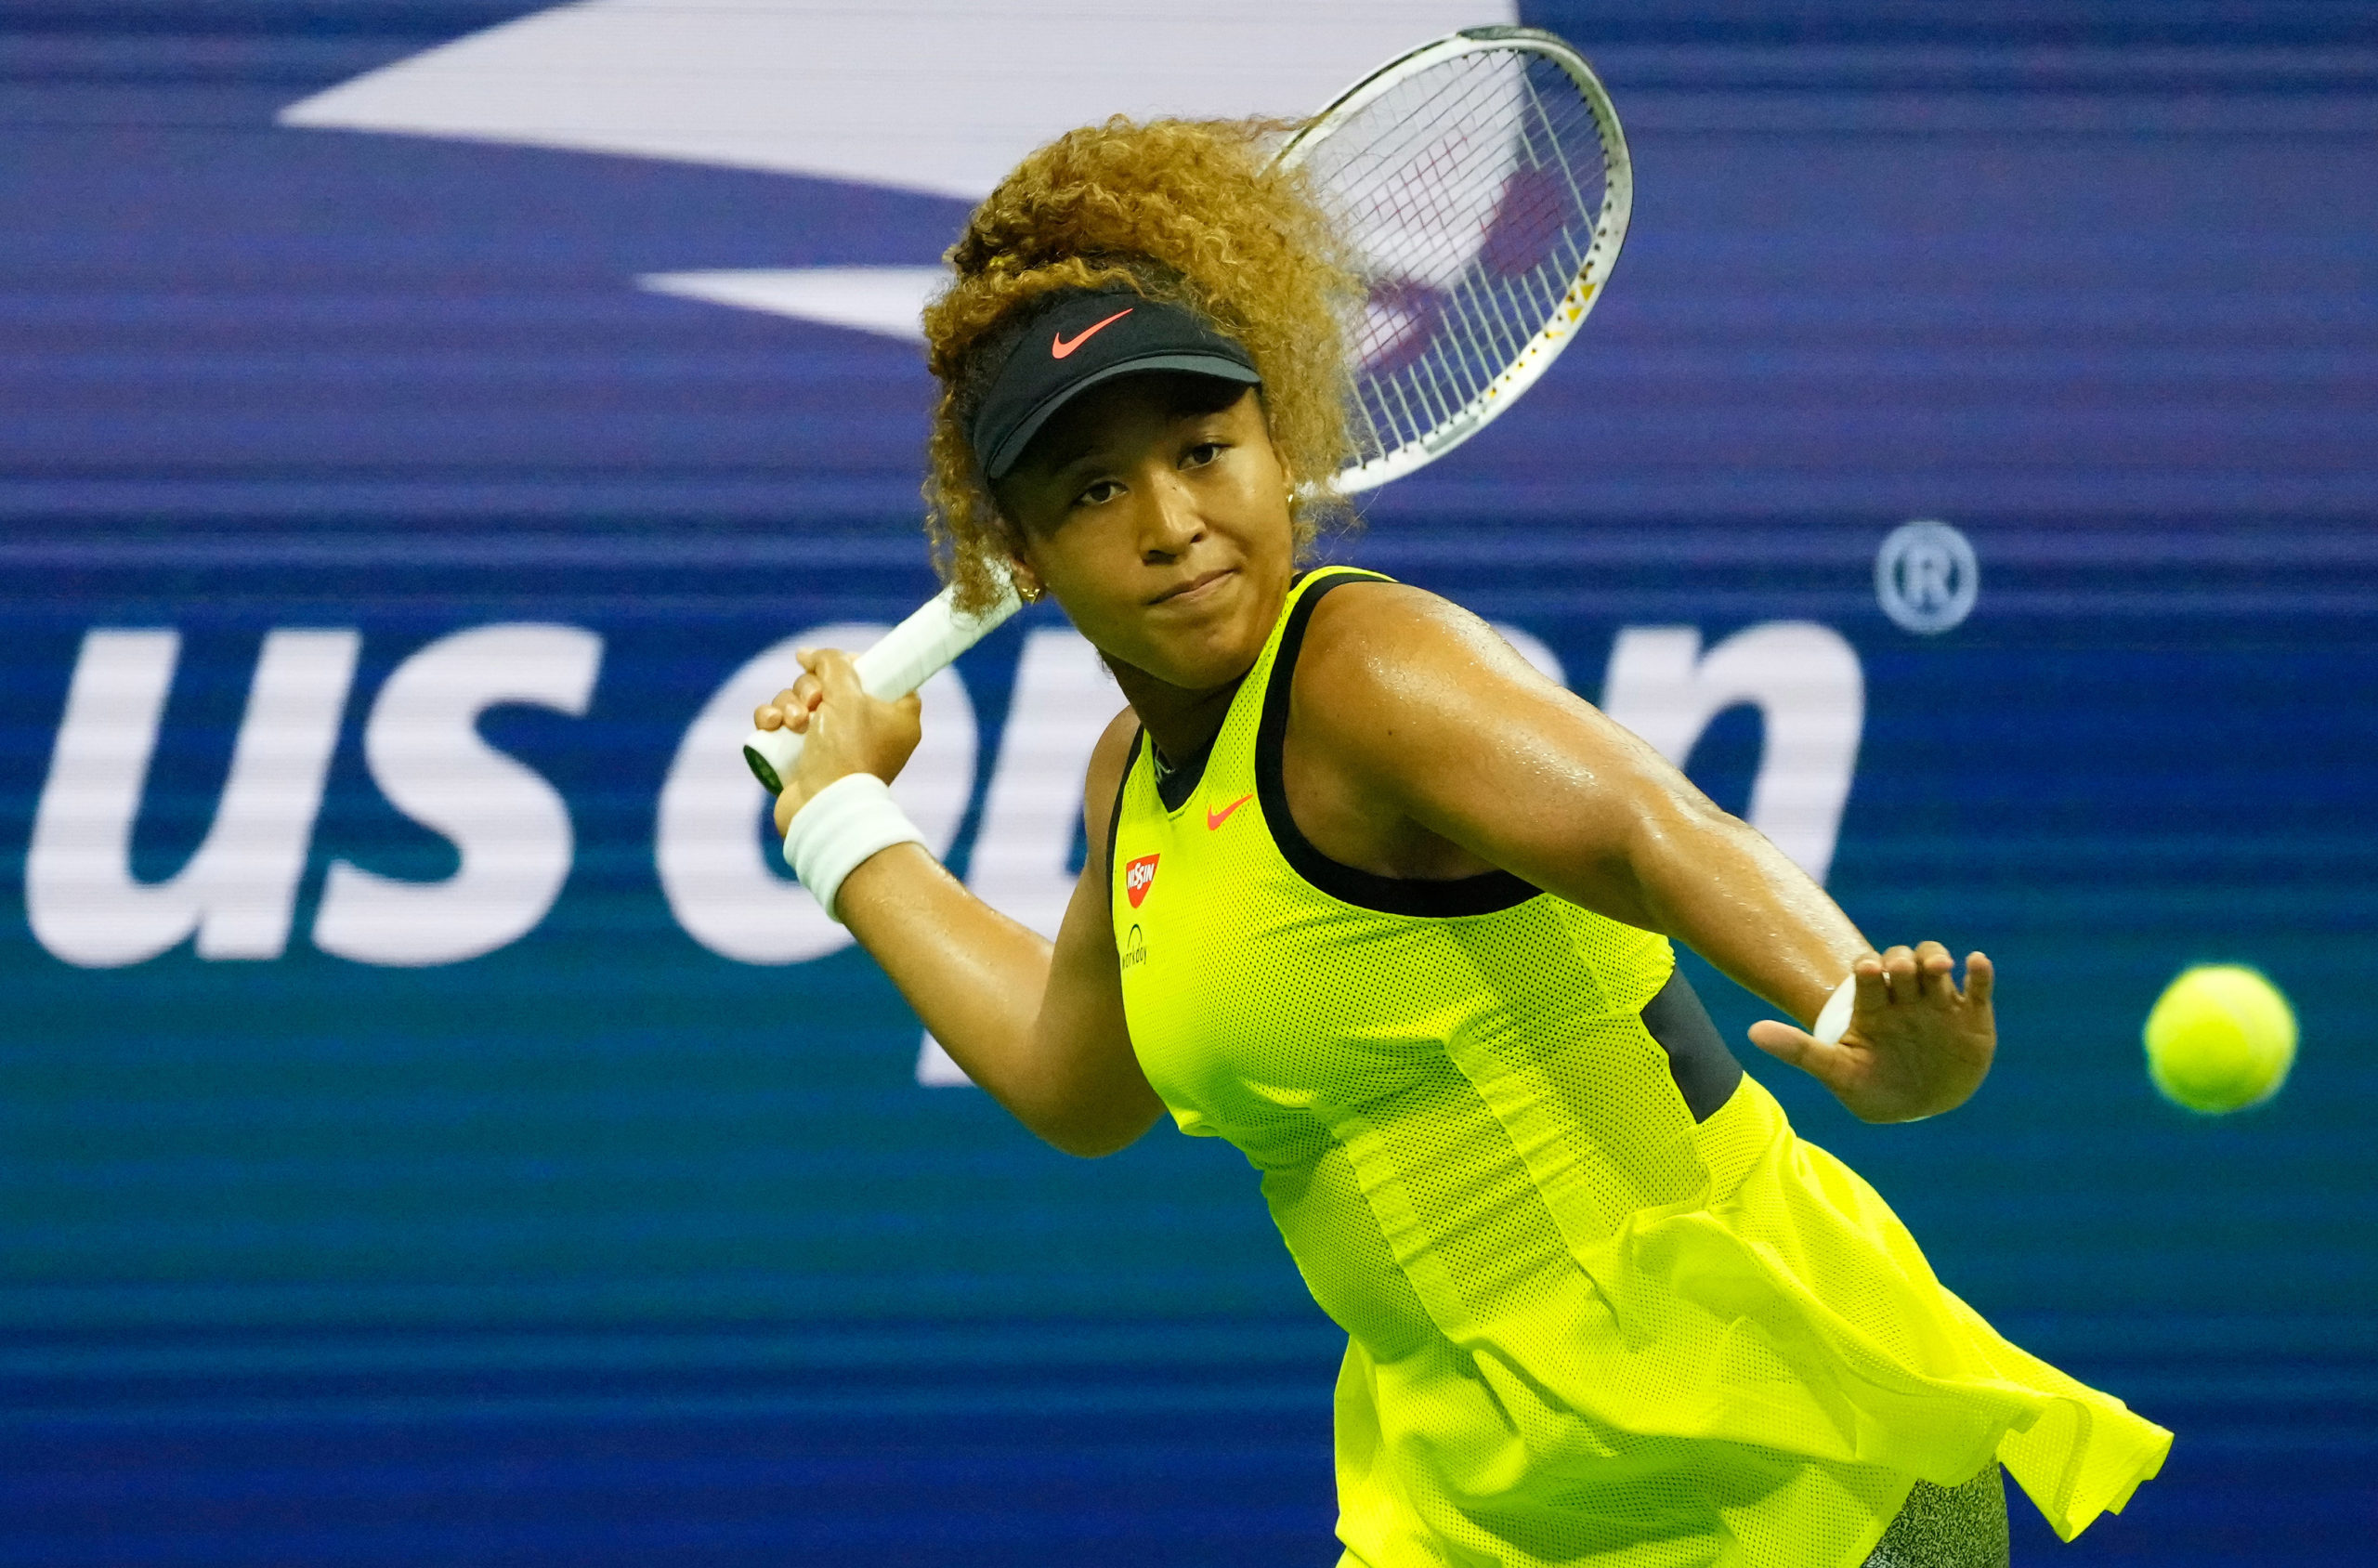  Naomi Osaka of Japan hits to Marie Bouzkova of the Czech Republic on day one of the 2021 U.S. Open tennis tournament at USTA Billie King National Tennis Center. 